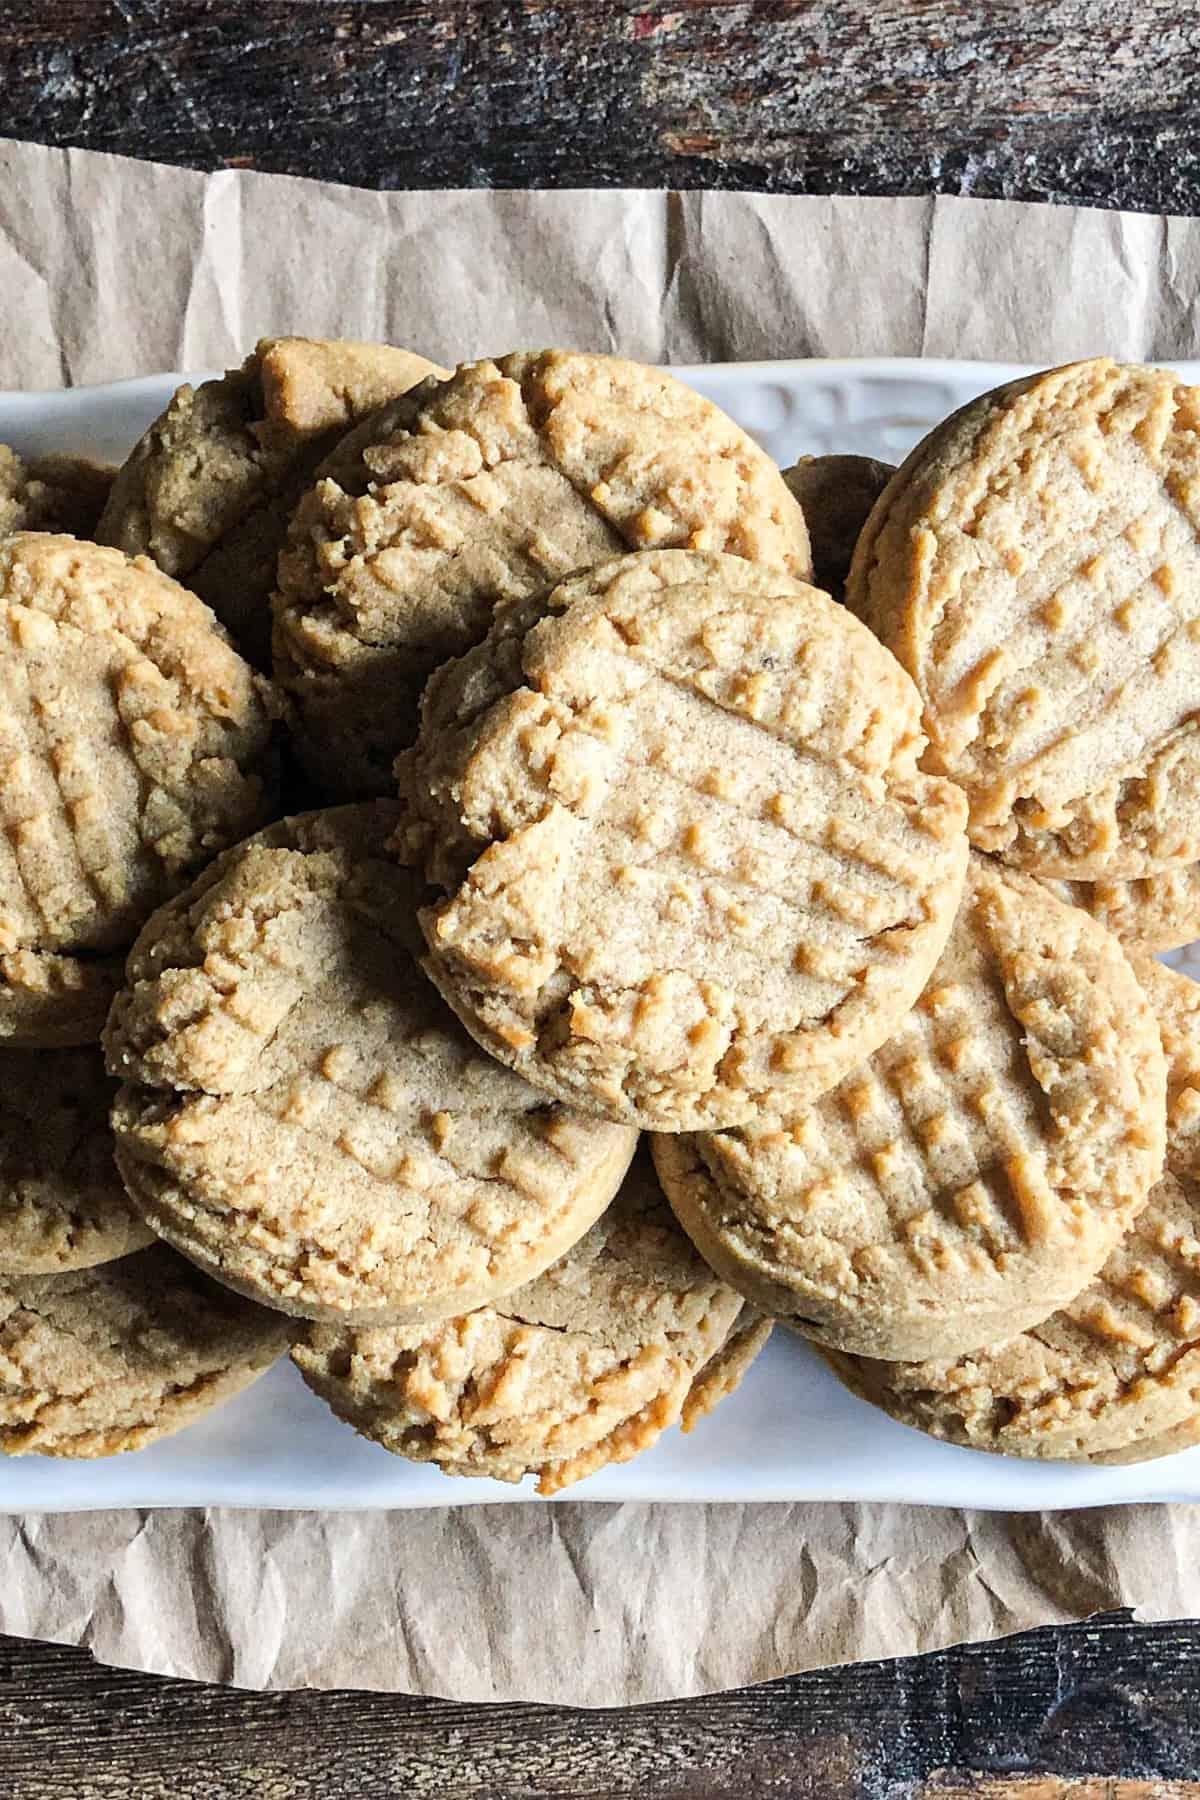 Peanut butter cookies are a great dessert to go with spaghetti.